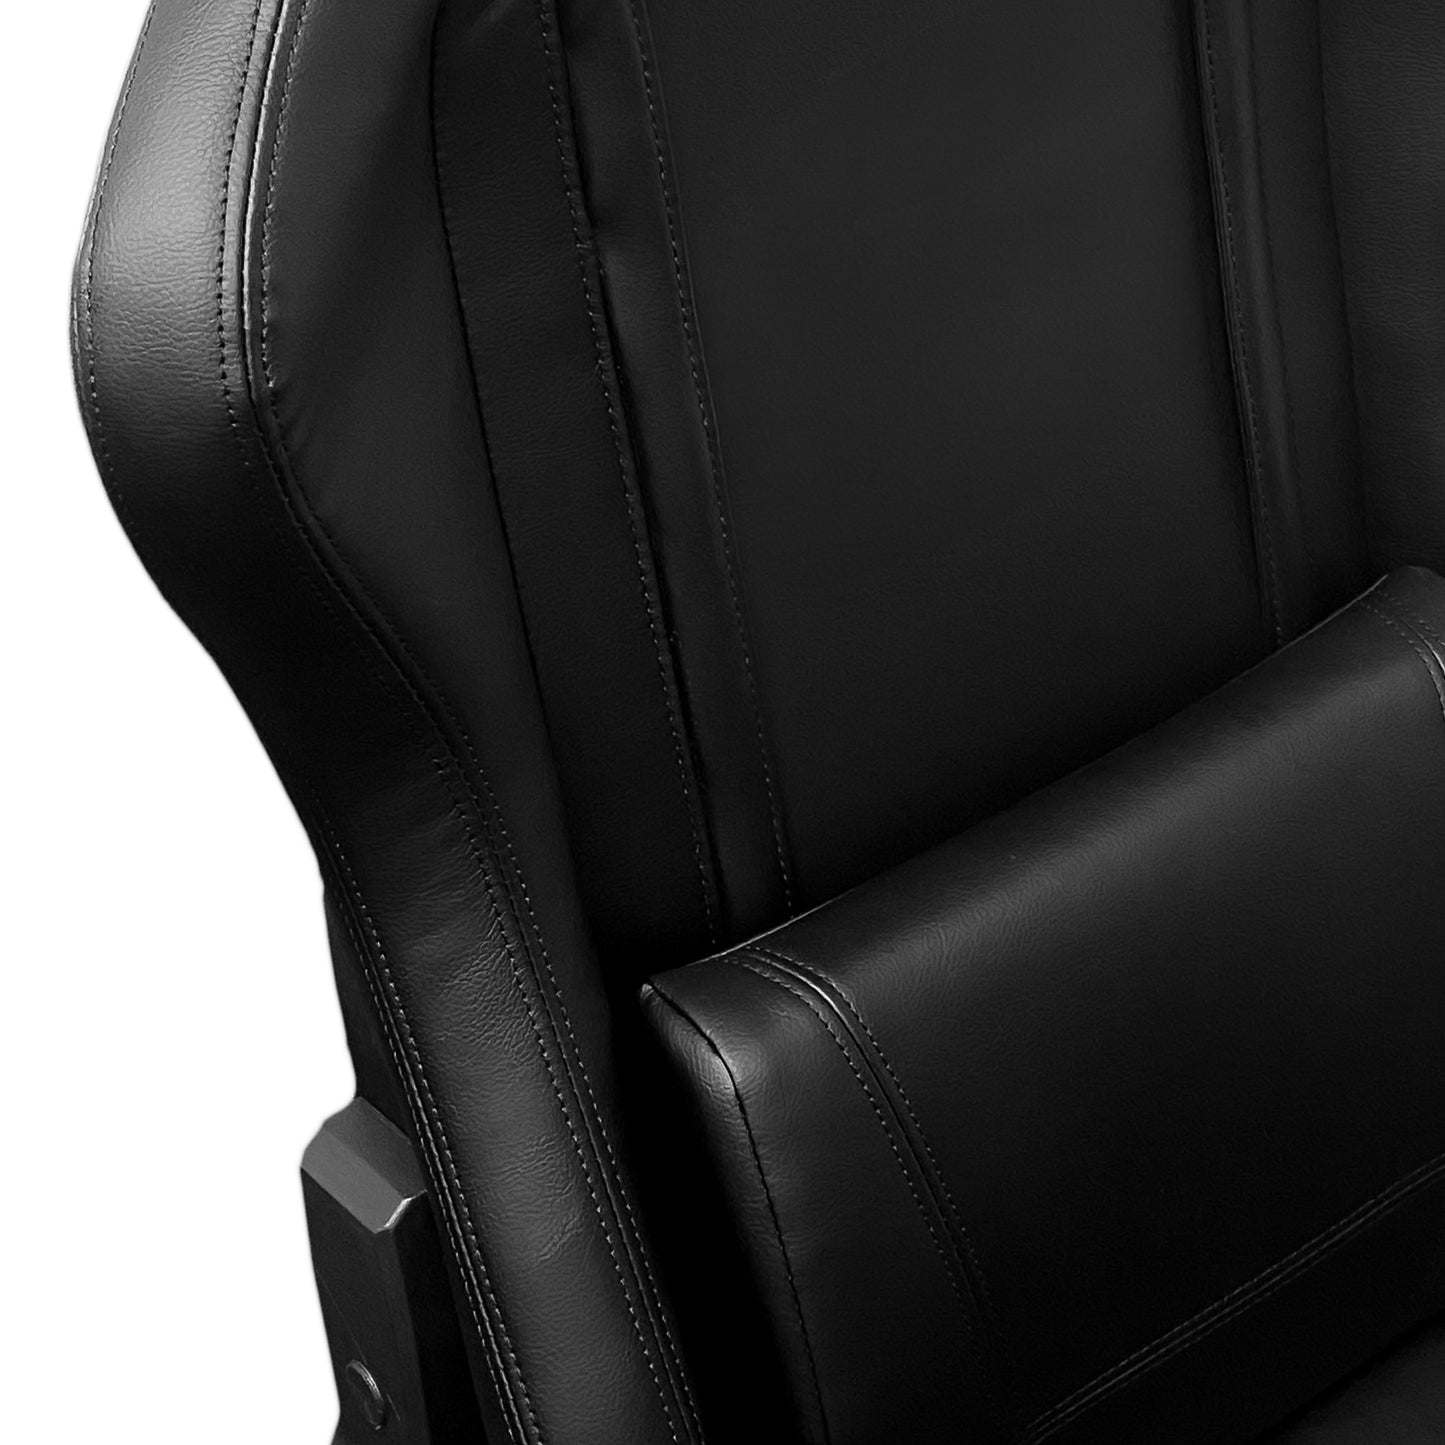 Xpression Pro Gaming Chair with Stingray Symbol Logo